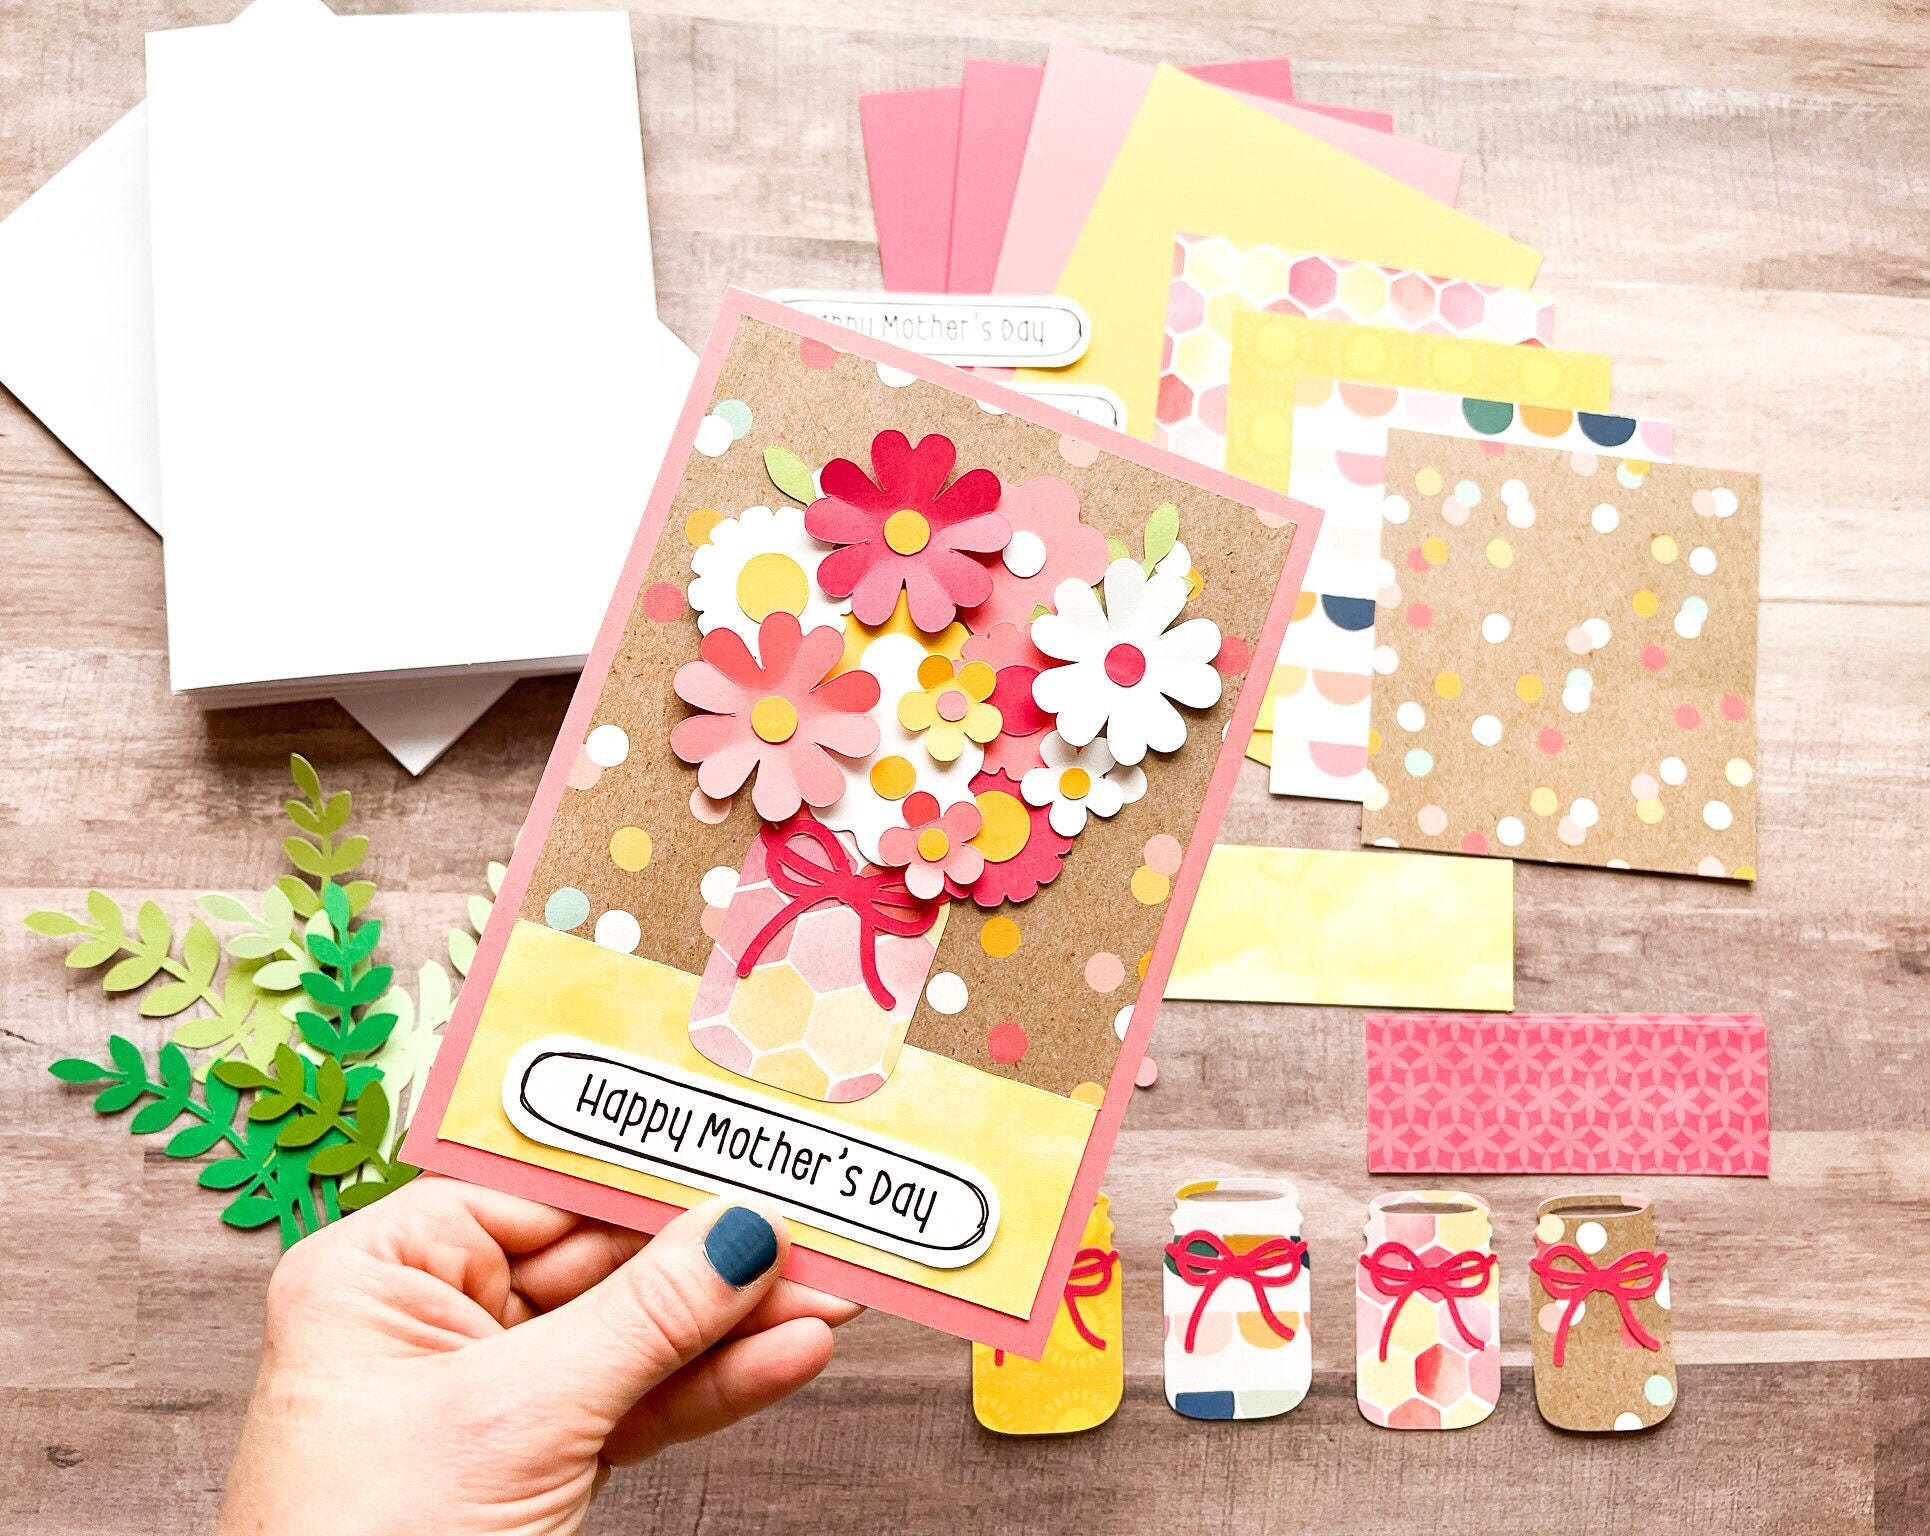 DIY Complete Card Making Kit for Boys & Girls 6 / Mothers' Day DIY Cards 